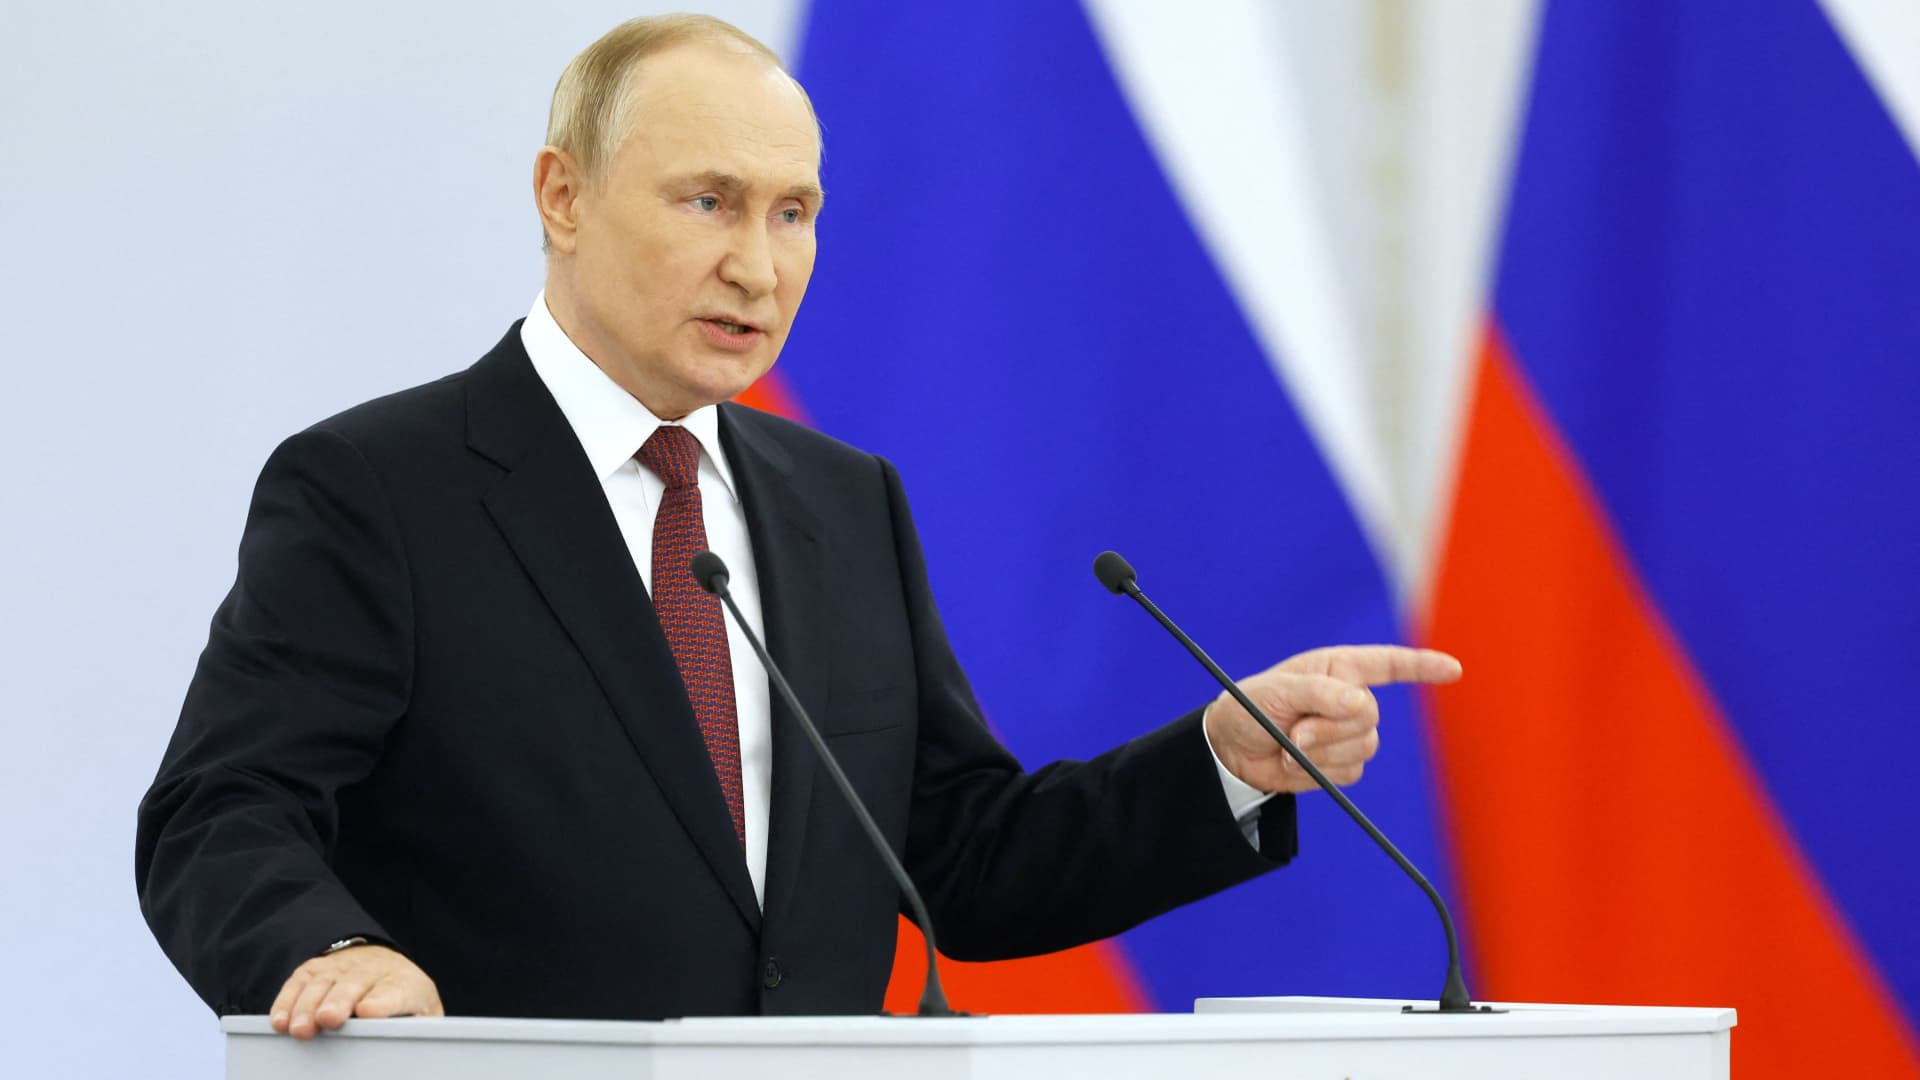 Russian President Vladimir Putin gives a speech during a ceremony formally annexing four regions of Ukraine Russian troops occupy - Lugansk, Donetsk, Kherson and Zaporizhzhia, at the Kremlin in Moscow on September 30, 2022.